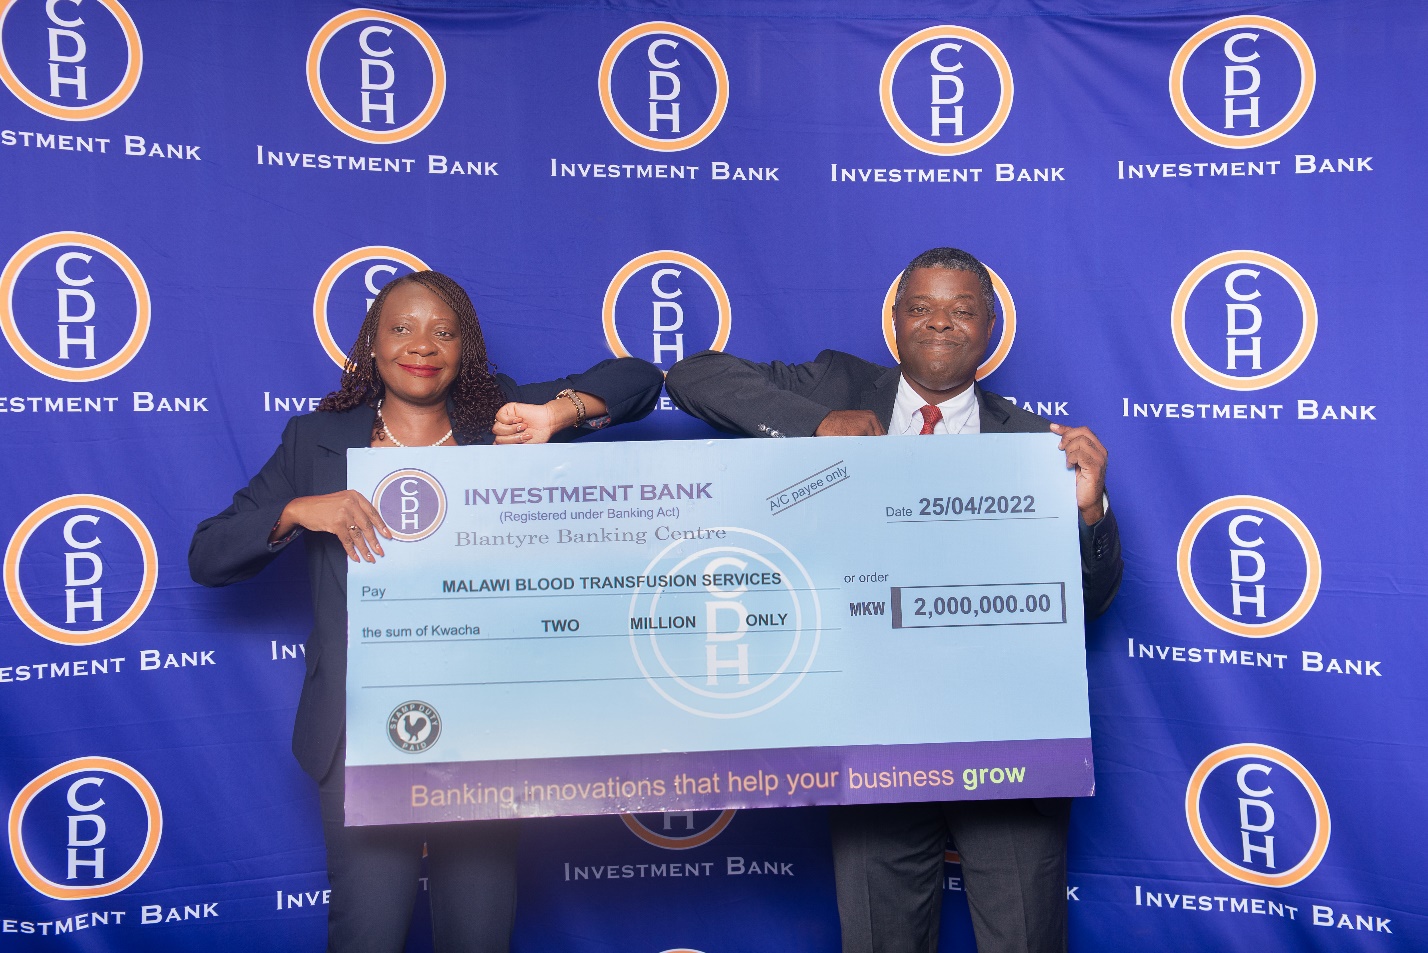 In the picture: CDH Investments Bank Chief Operationg Officer Mr James Chikoti (R) handing over a symbolic cheque to Malawi Blood Transfusion Services Chief Executive Officer Mrs Natasha Nsamala. 